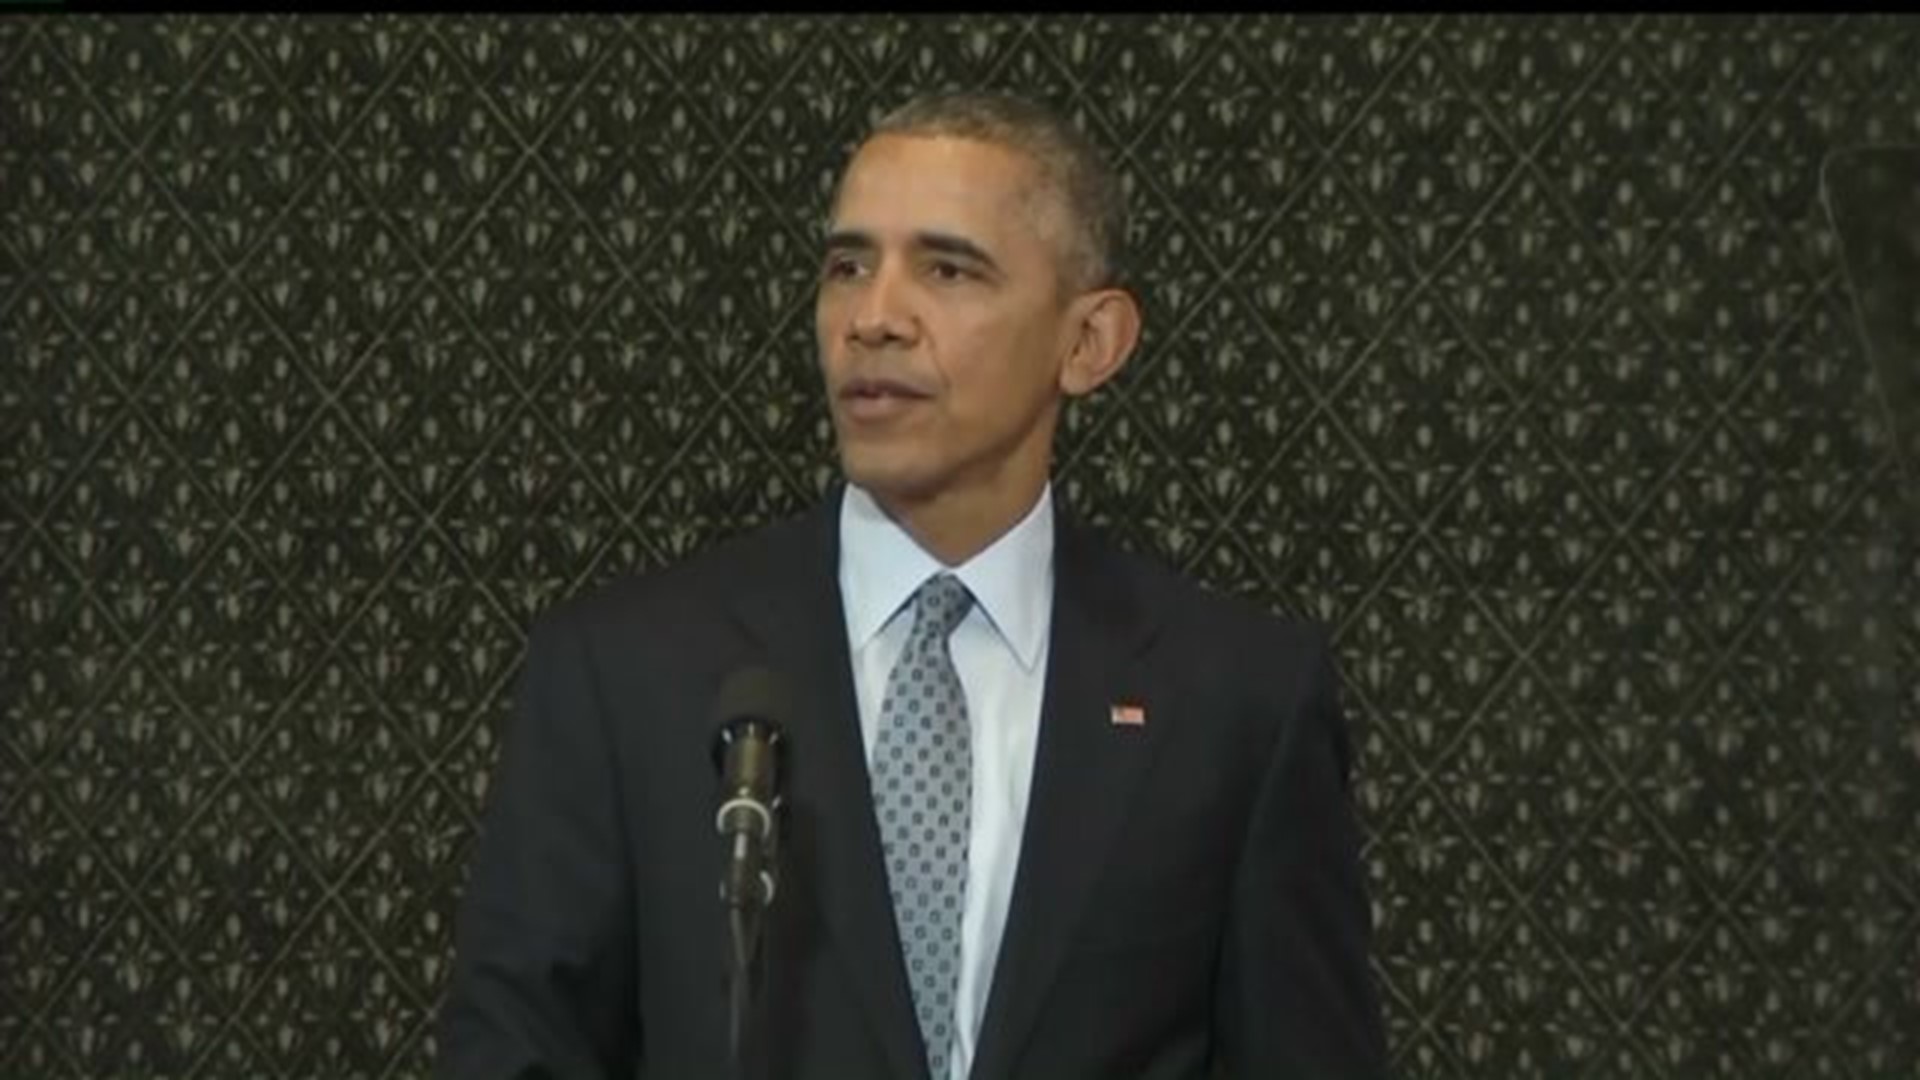 Obama calls for compromise